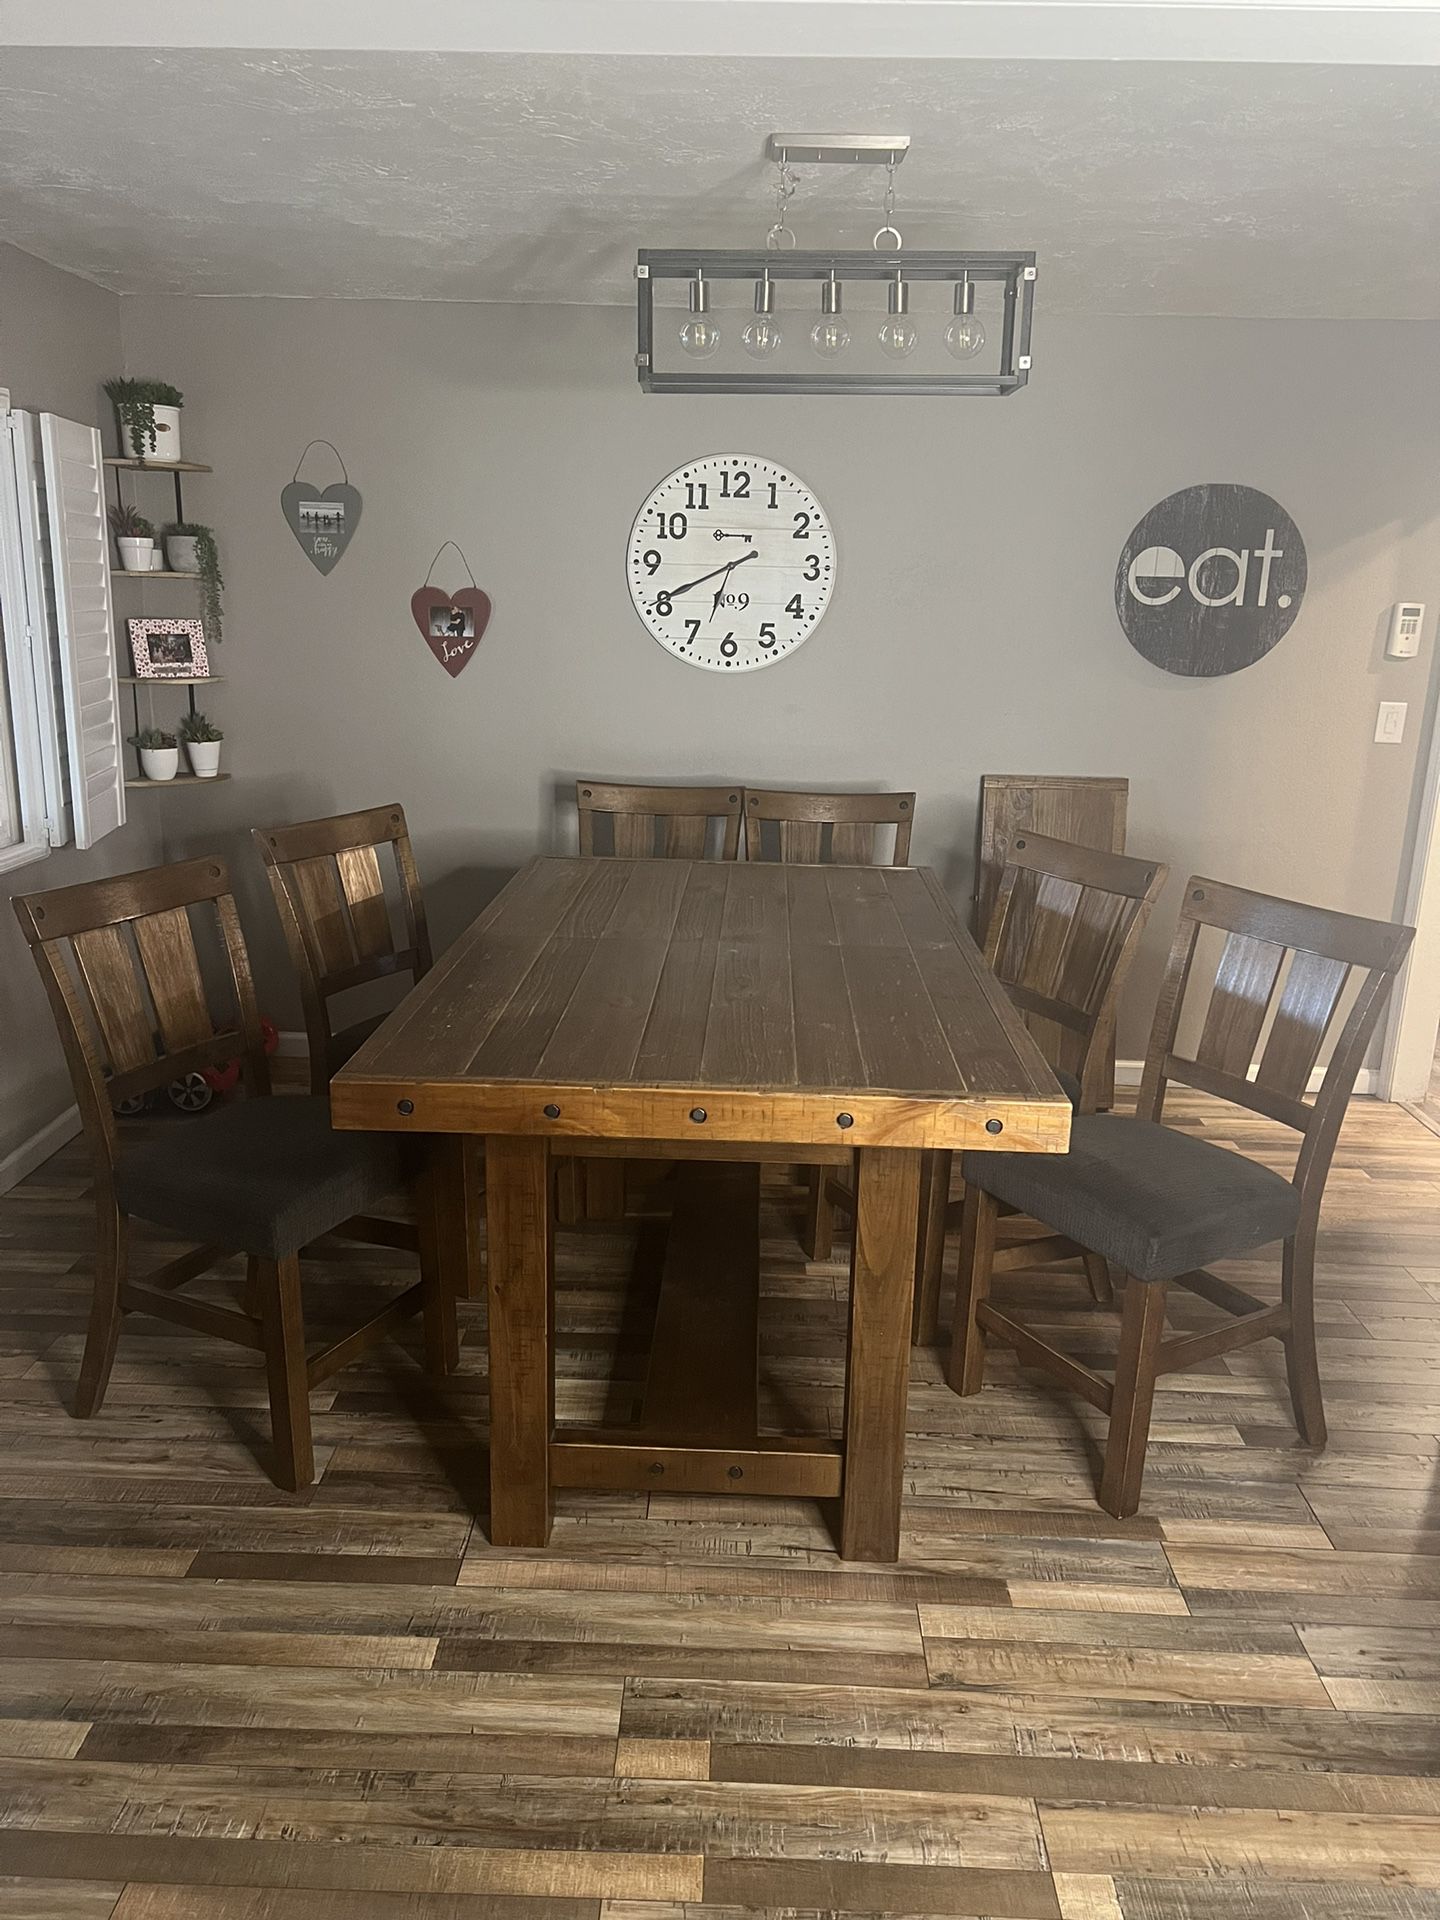 Kitchen Table & 8 Chairs